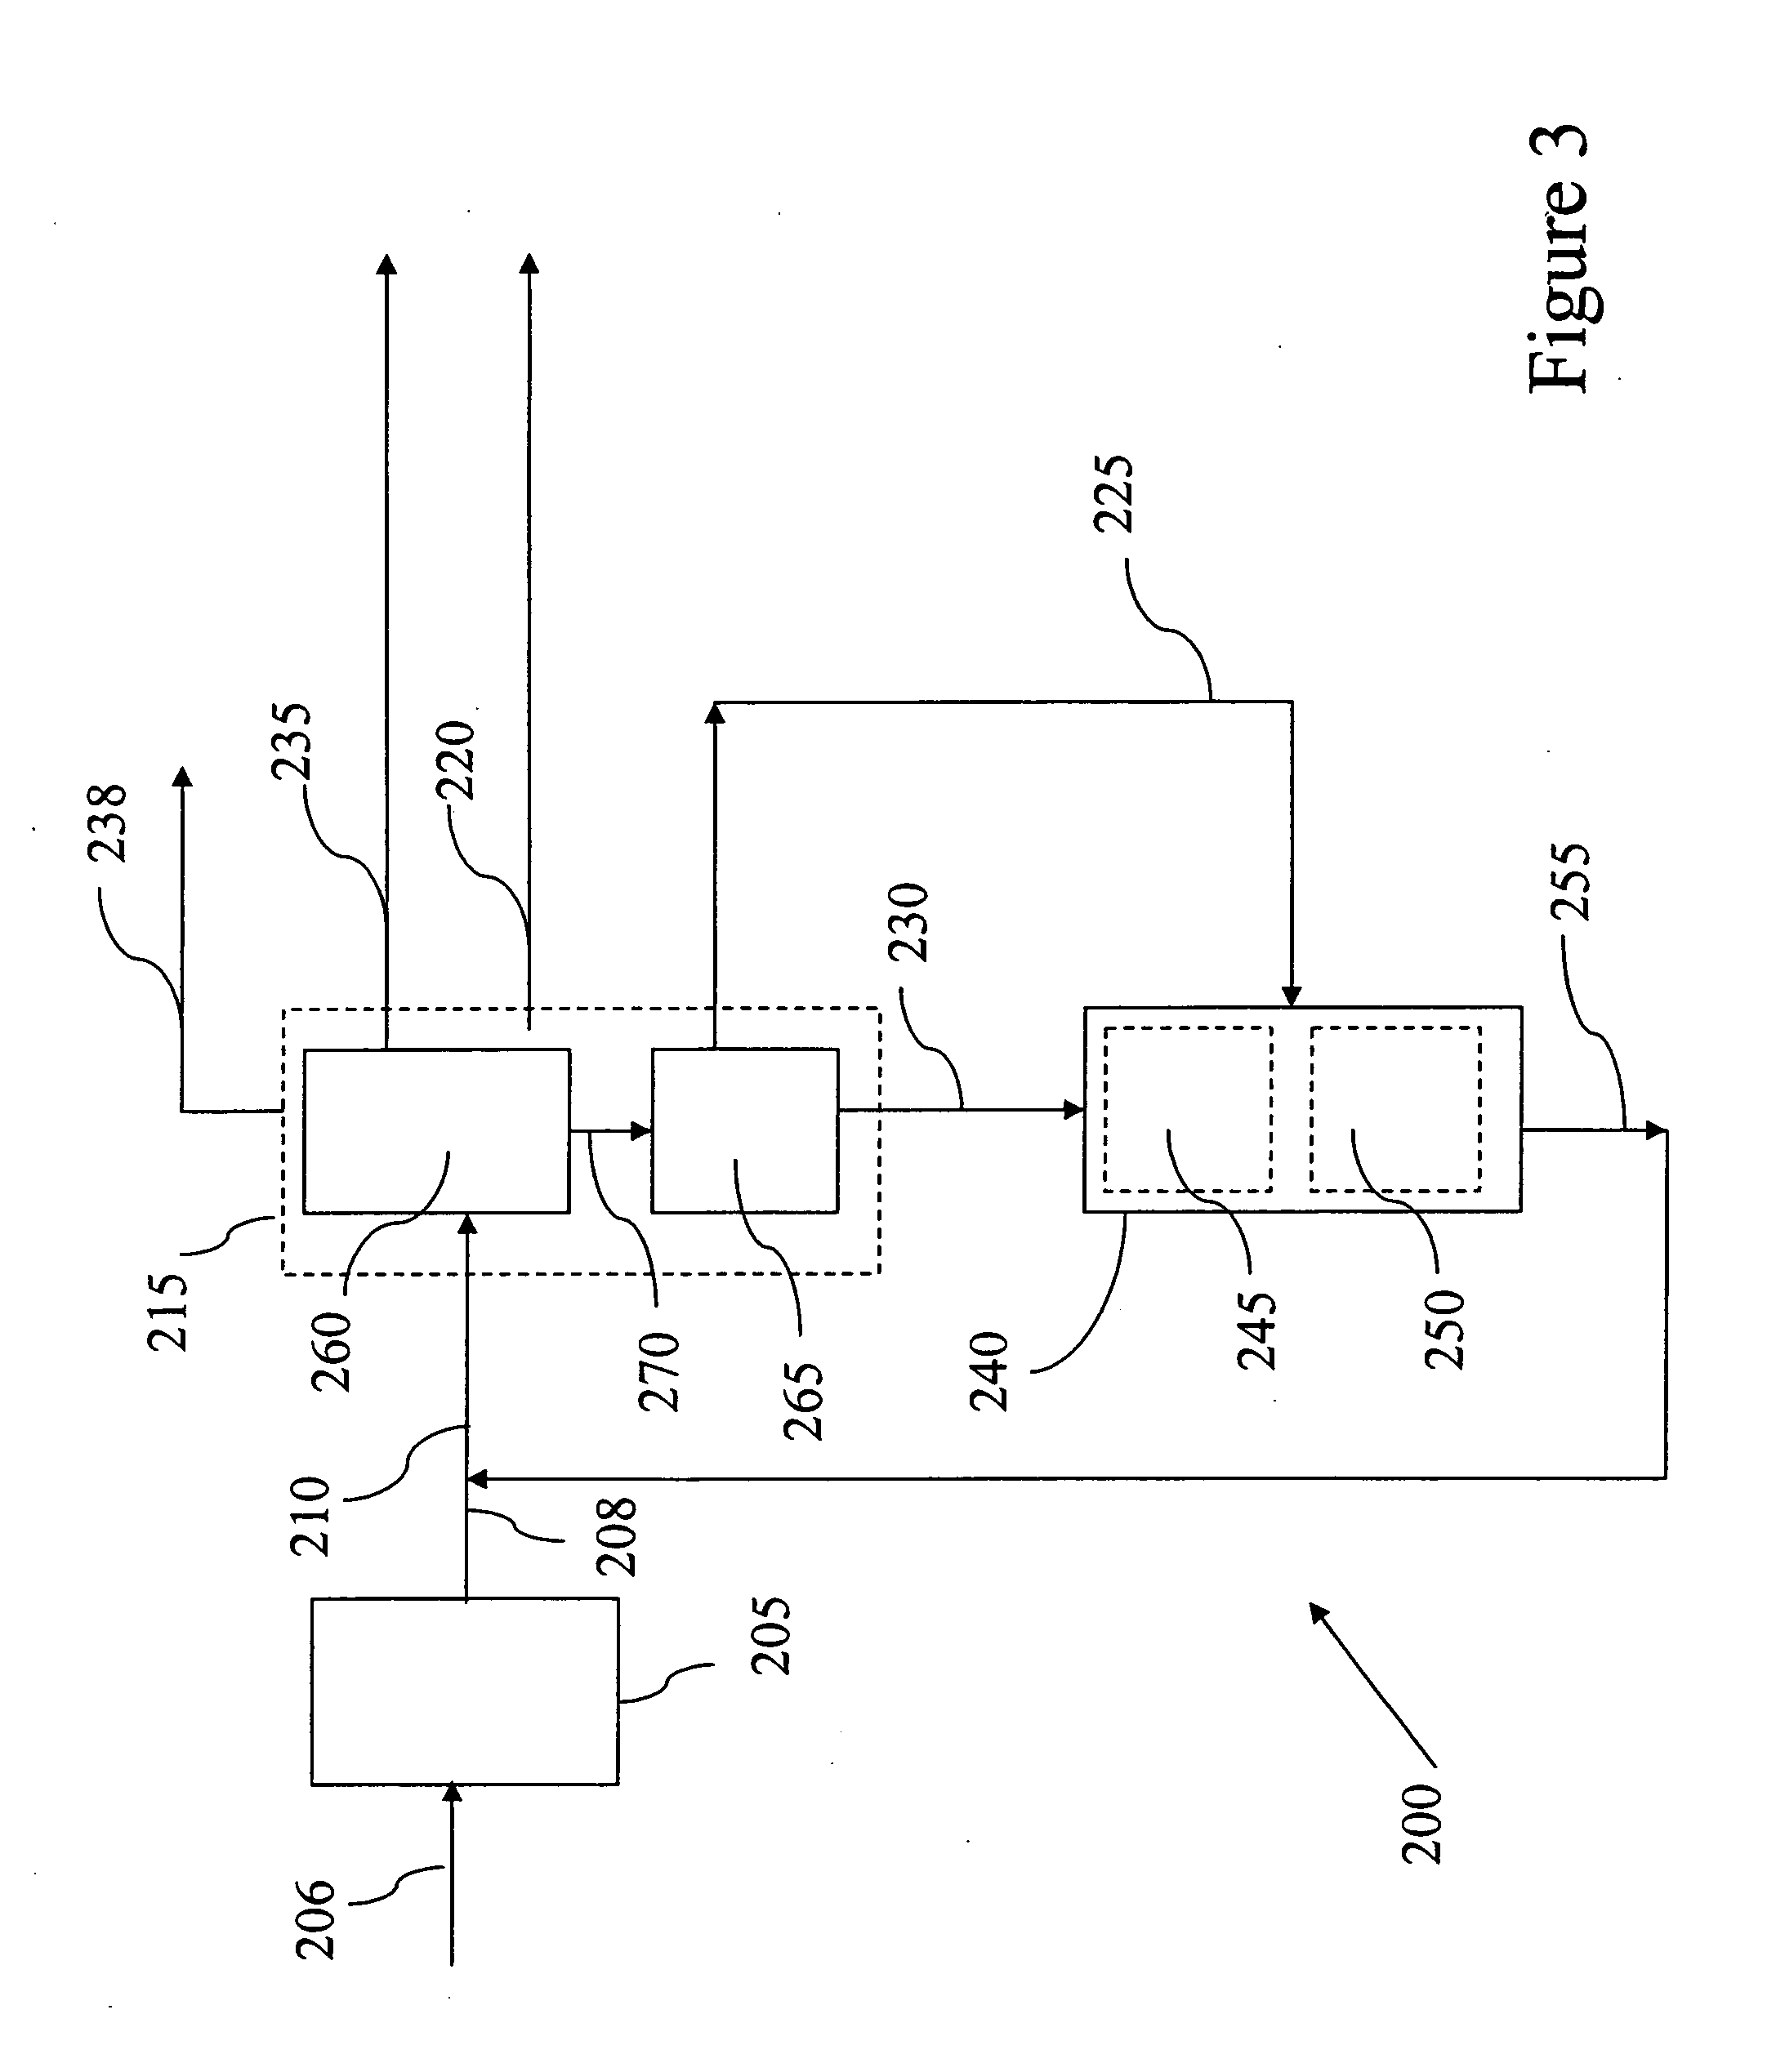 Hydroprocessing methods and apparatus for use in the preparation of liquid hydrocarbons